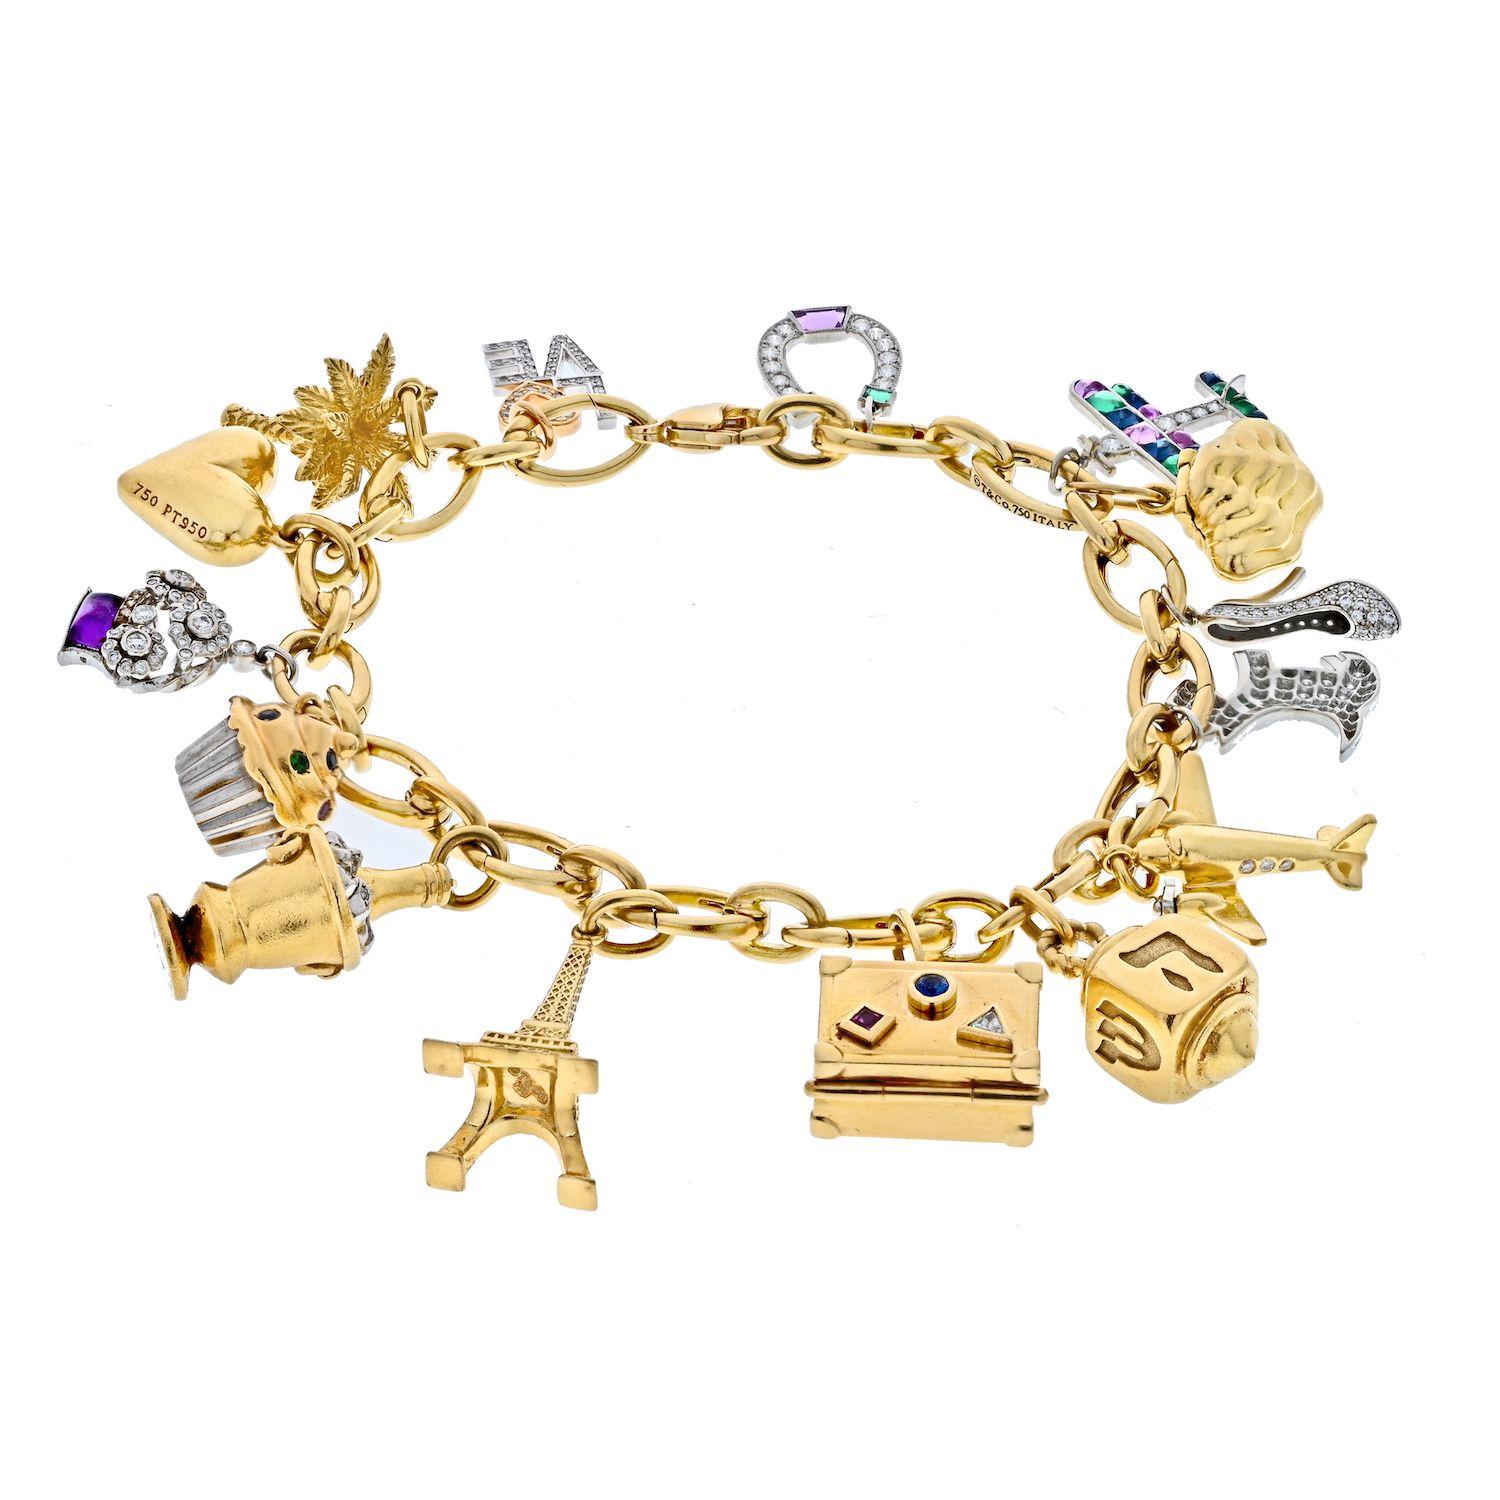 Tiffany & Co. Platinum & 18K Yellow Gold Gemset And Diamond Charm Bracelet.

The gold link bracelet suspends 15 charms including a palm tree, a champagne bucket set with round diamonds, an airplane, a round diamond-set shoe, an Eiffel tower, among